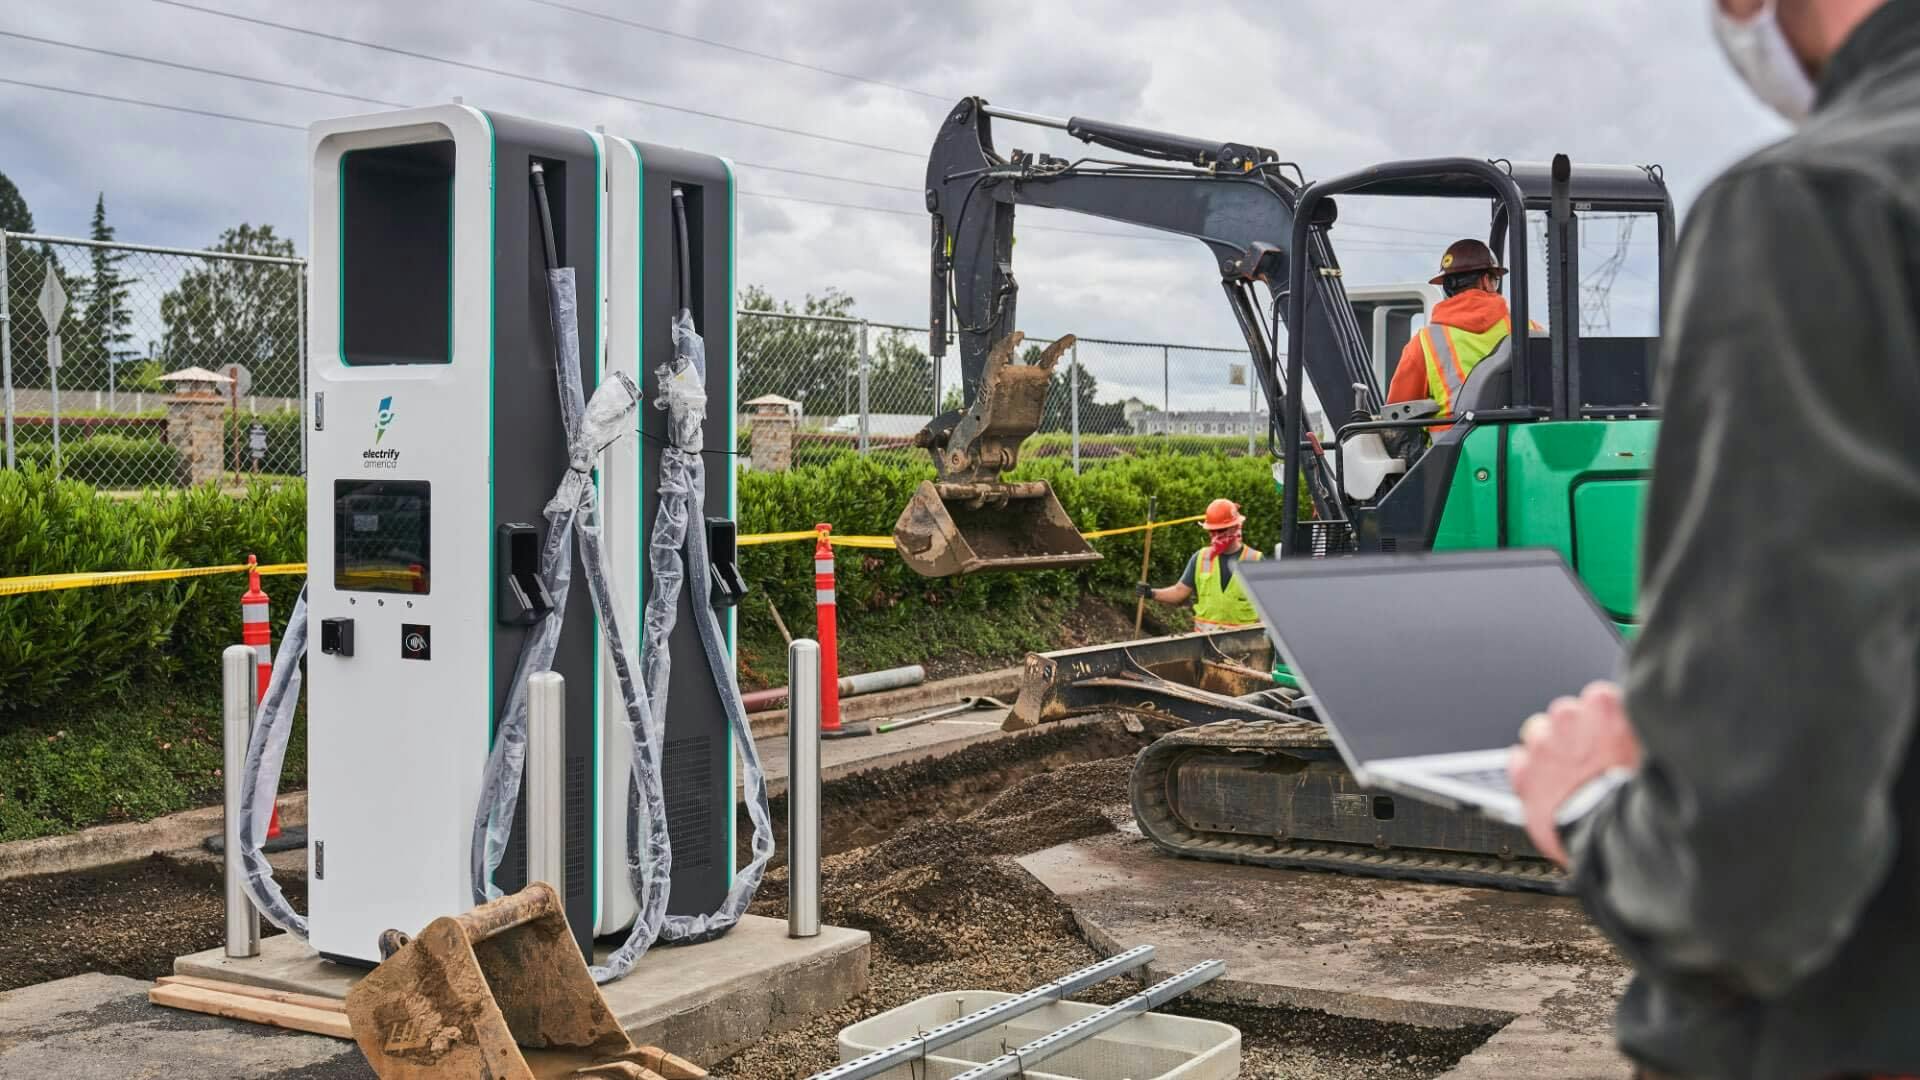 Workers installing electric car chargers with heavy machinery